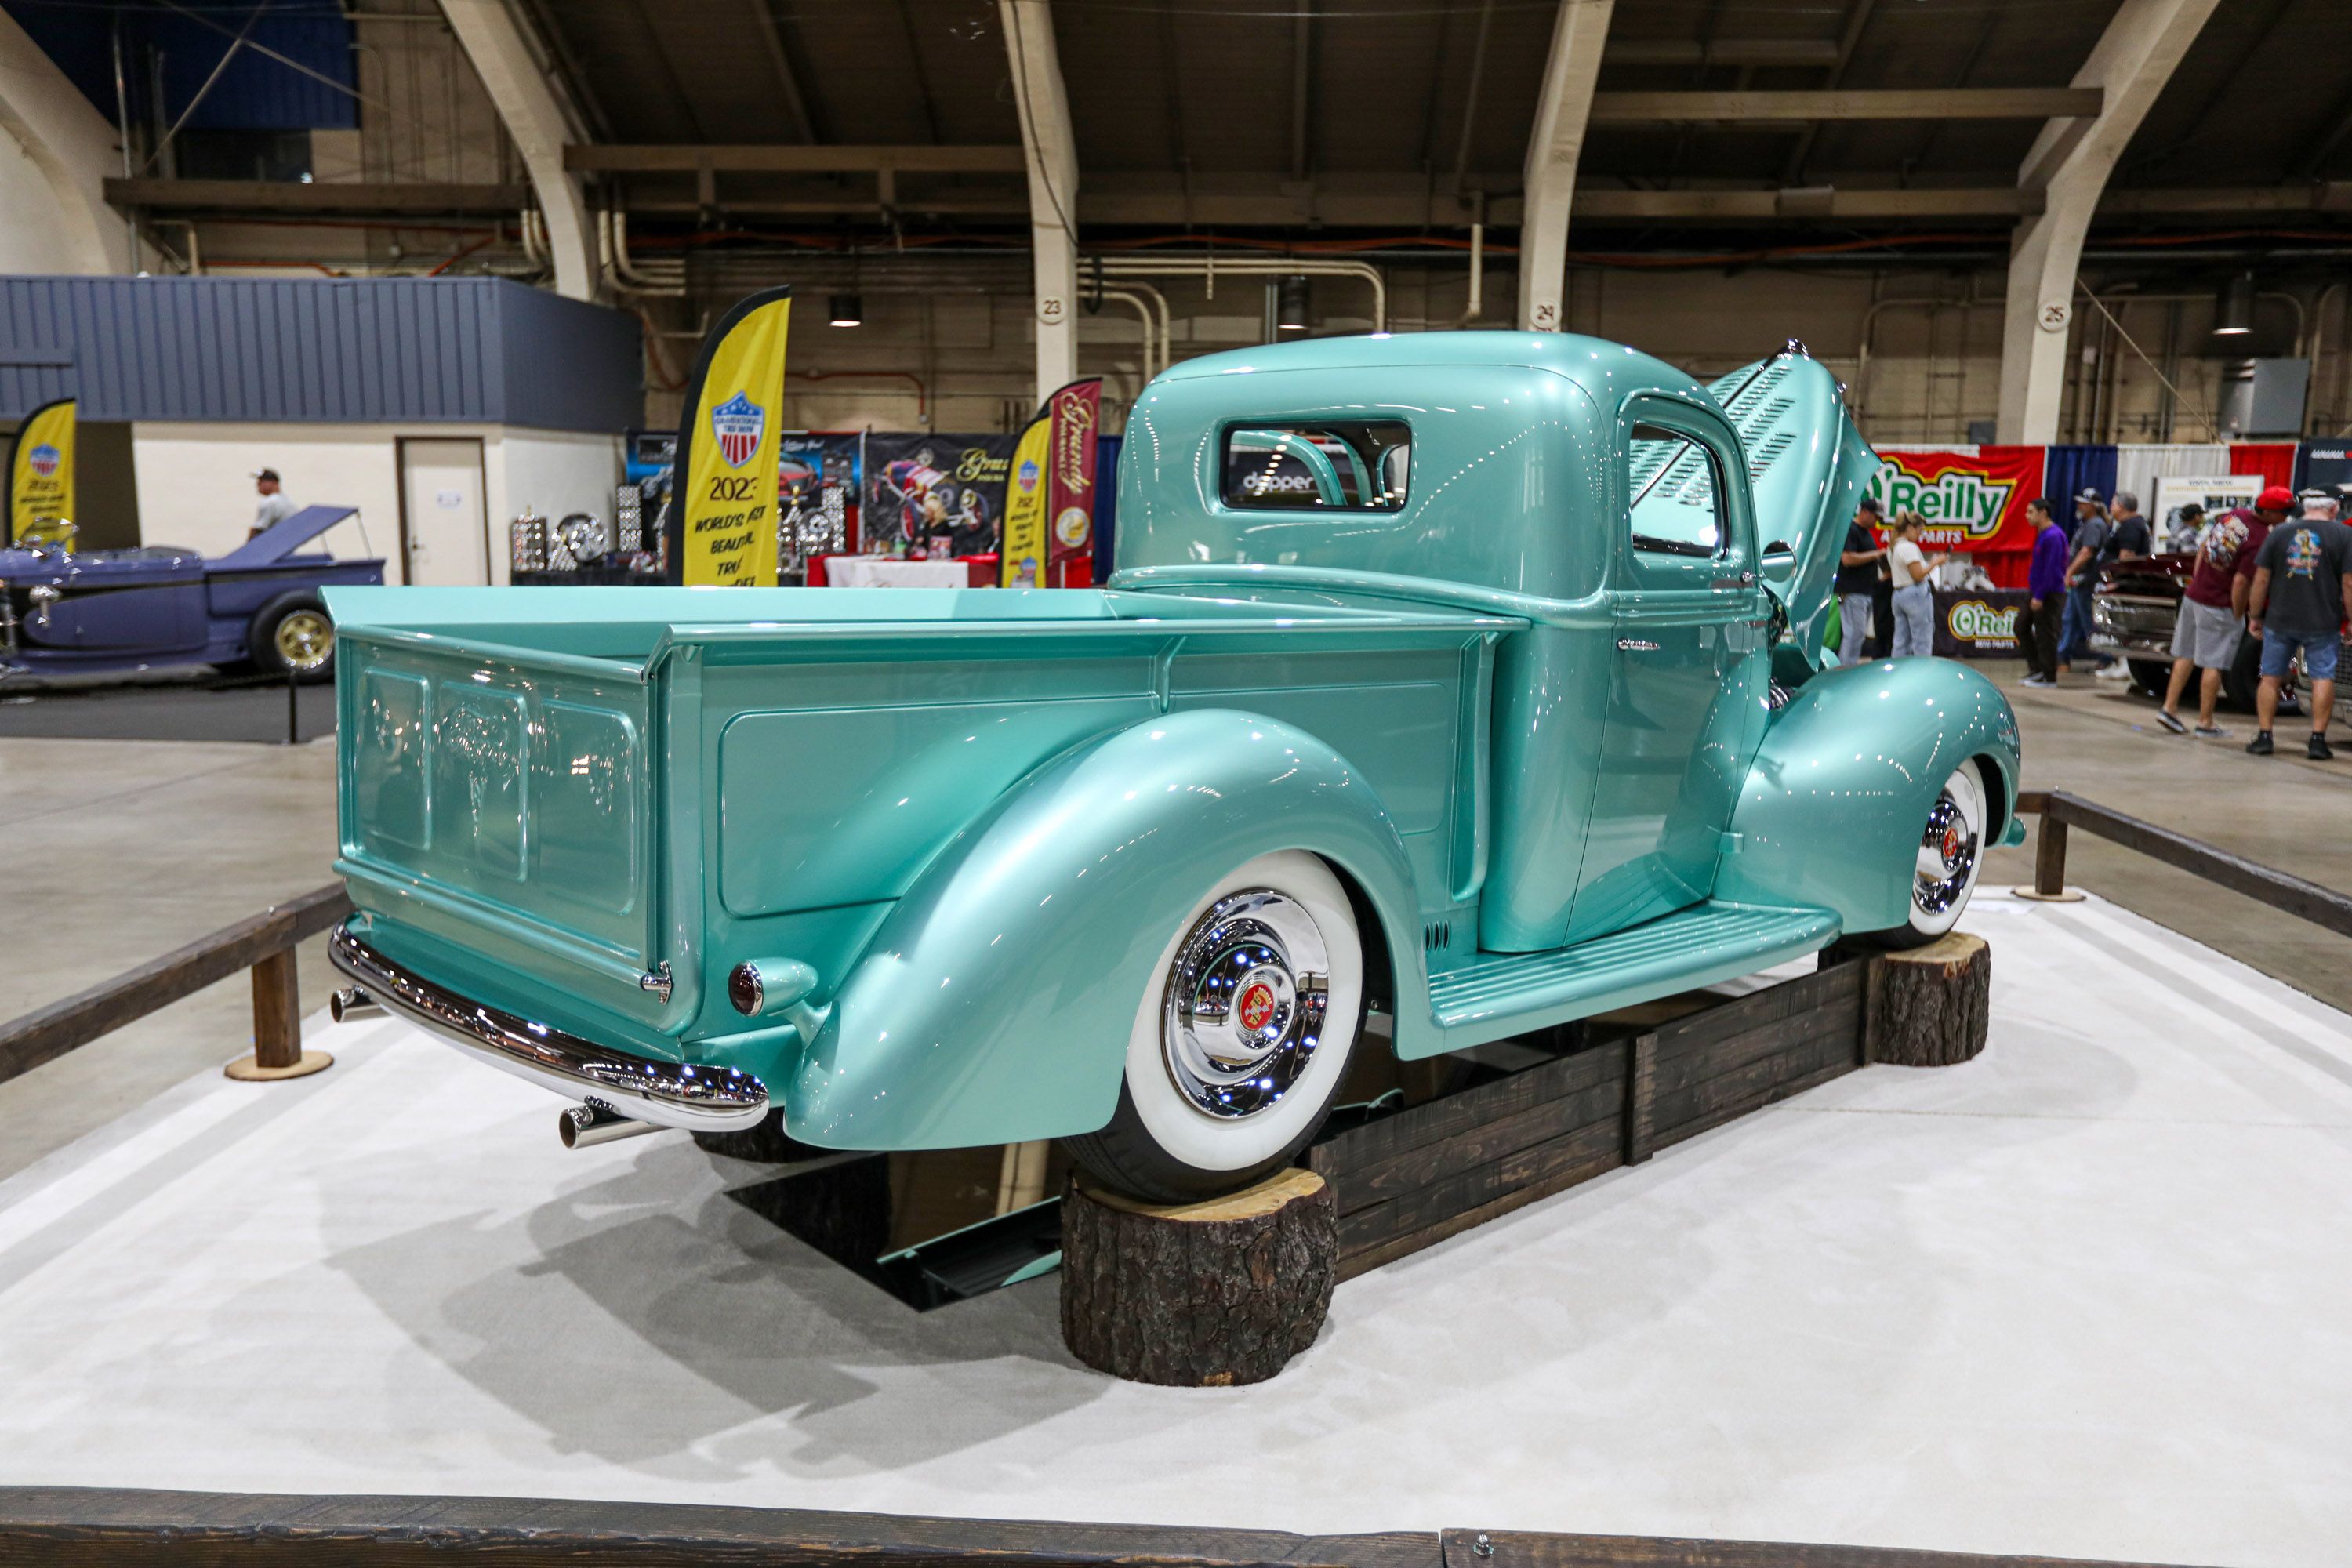 Stunningly Putting in Stunning Blue: The 1940 Ford Claims Title of World’s Most Beautiful Truck